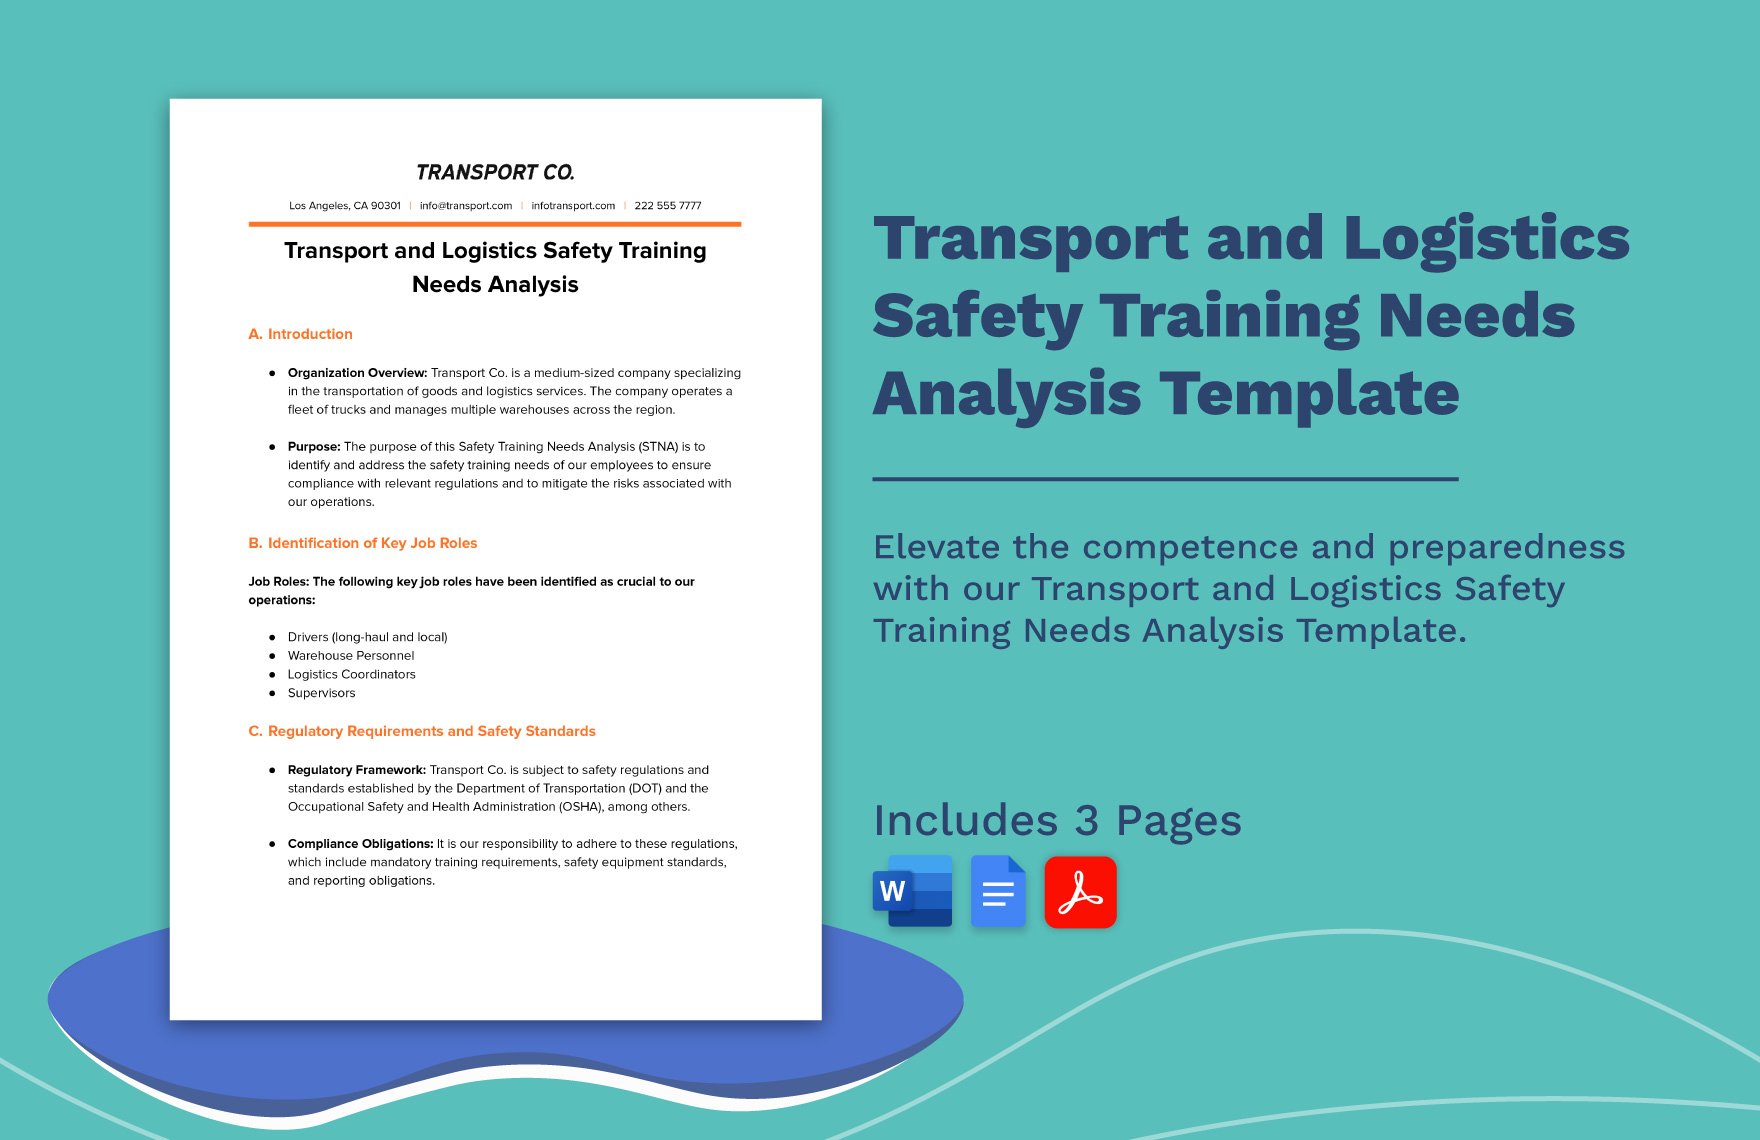 Transport and Logistics Safety Training Needs Analysis Template in Word, Google Docs, PDF